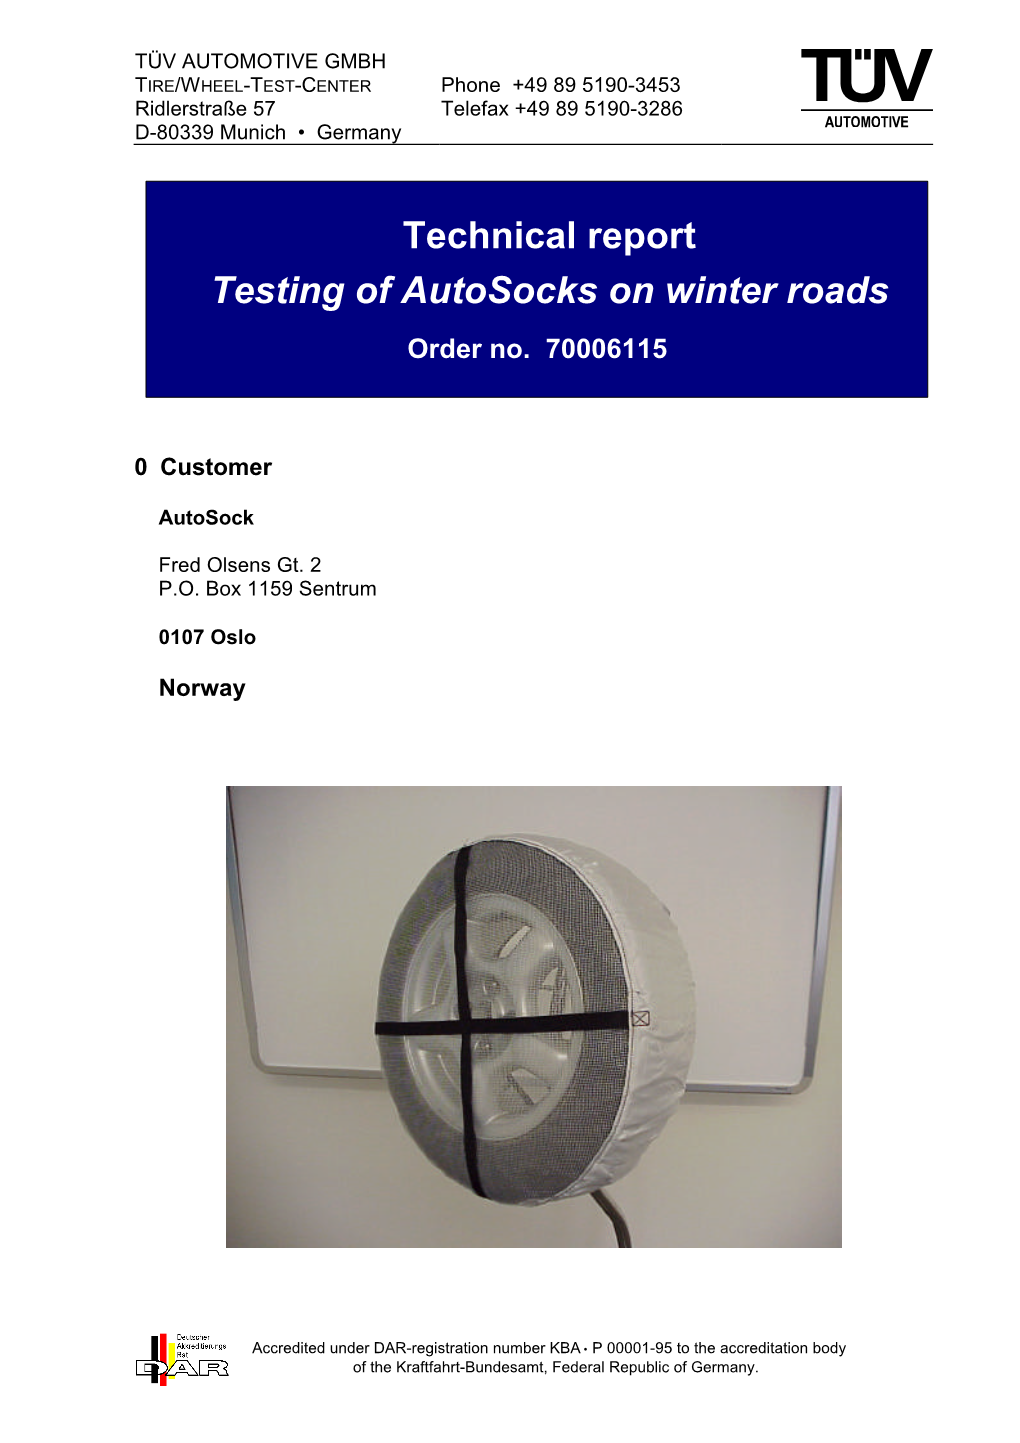 Technical Report Testing of Autosocks on Winter Roads